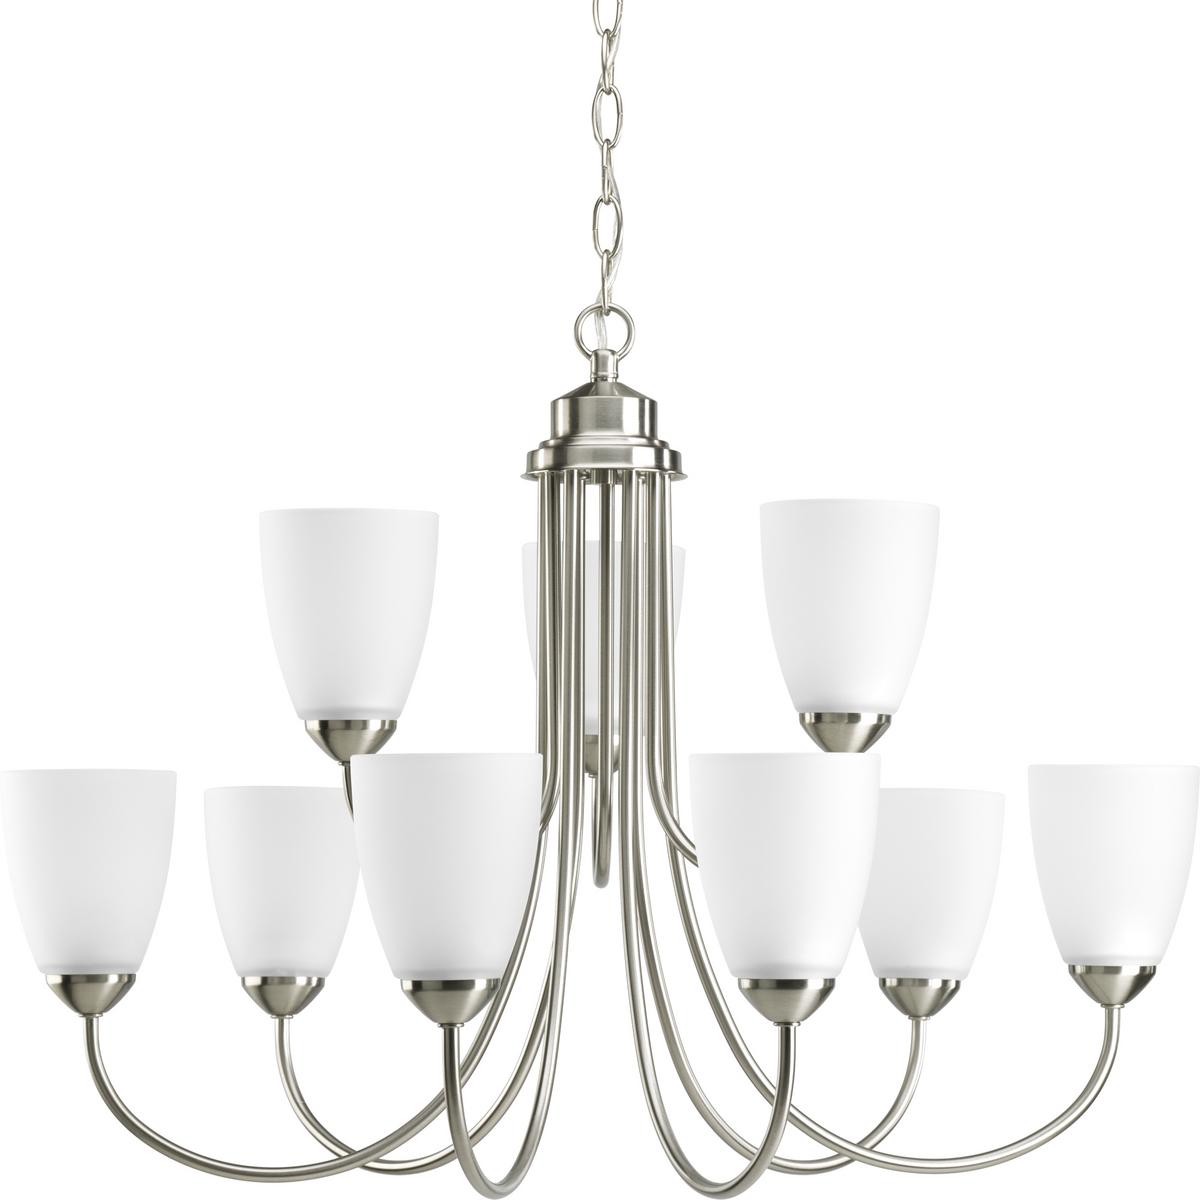 Hubbell P4627-09 Nine-light, two-tier chandelier from Gather possesses a smart simplicity to complement today's home. Brushed Nickel metal arms descend downwards and curve sharply to prop white etched glass shades. Etched glass add distinction and provide pleasing illumin